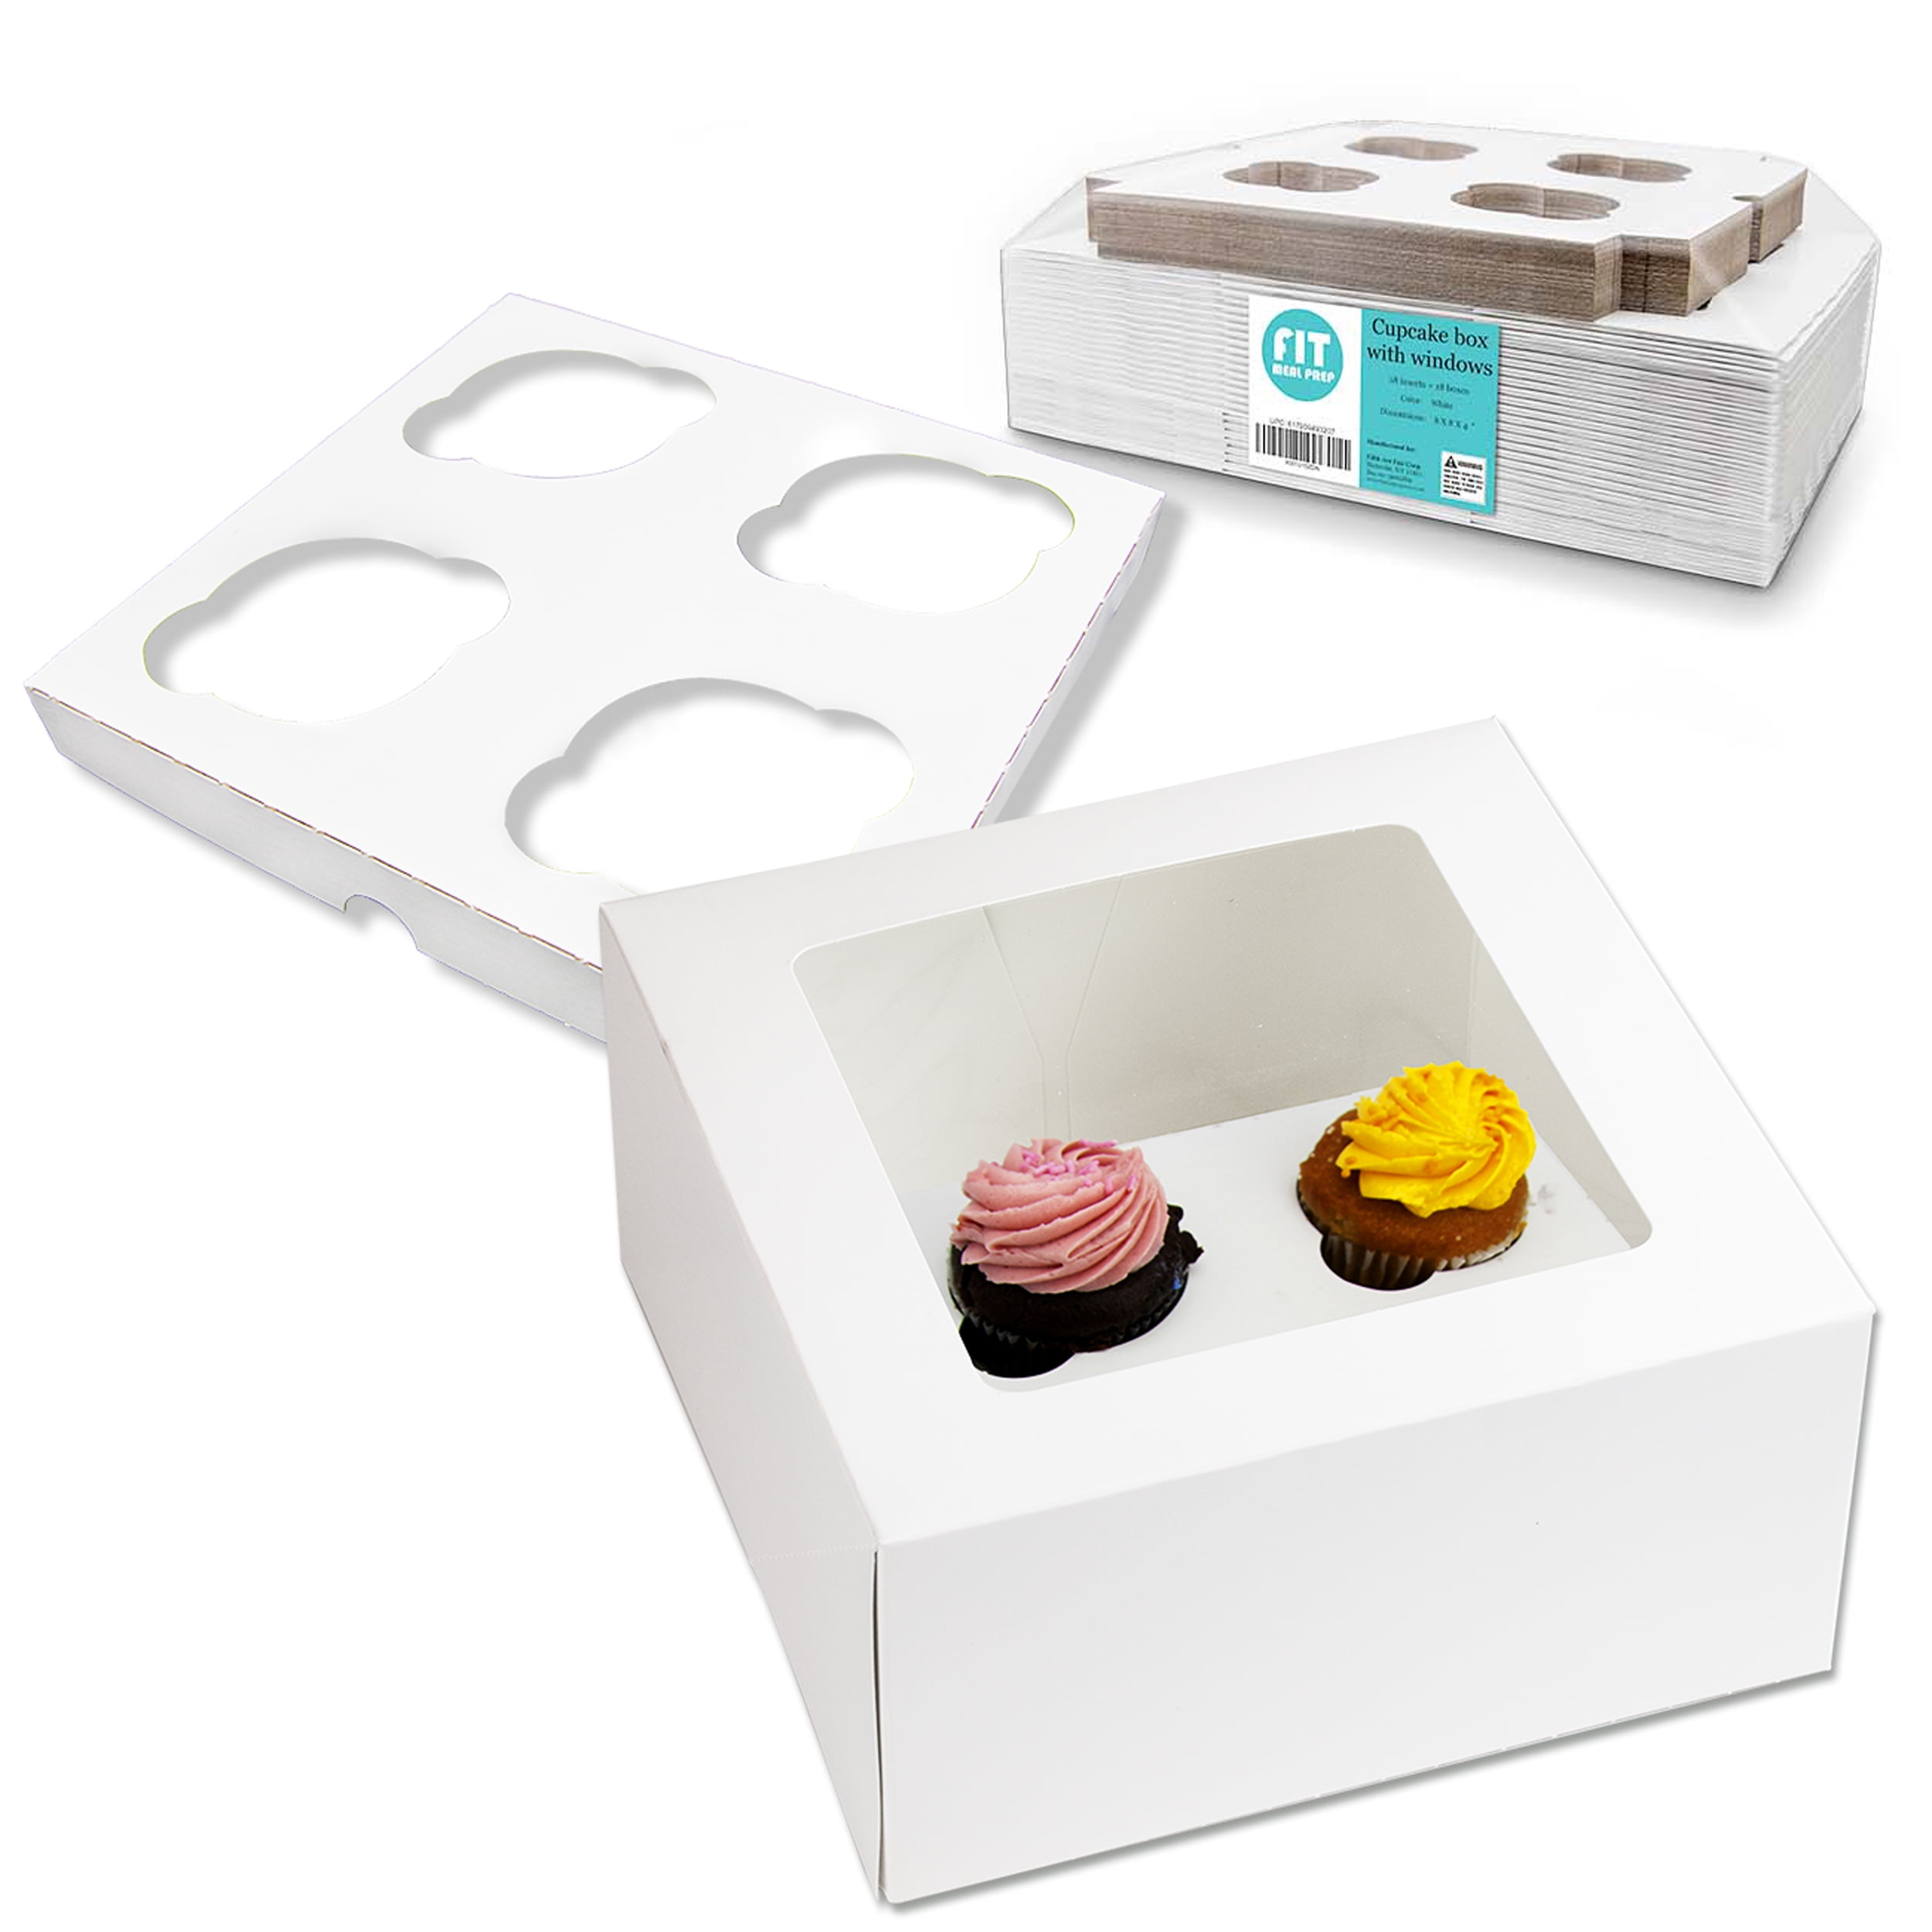 Pack of 25 Windowed Cupcake Boxes with 6 Cavity Insert